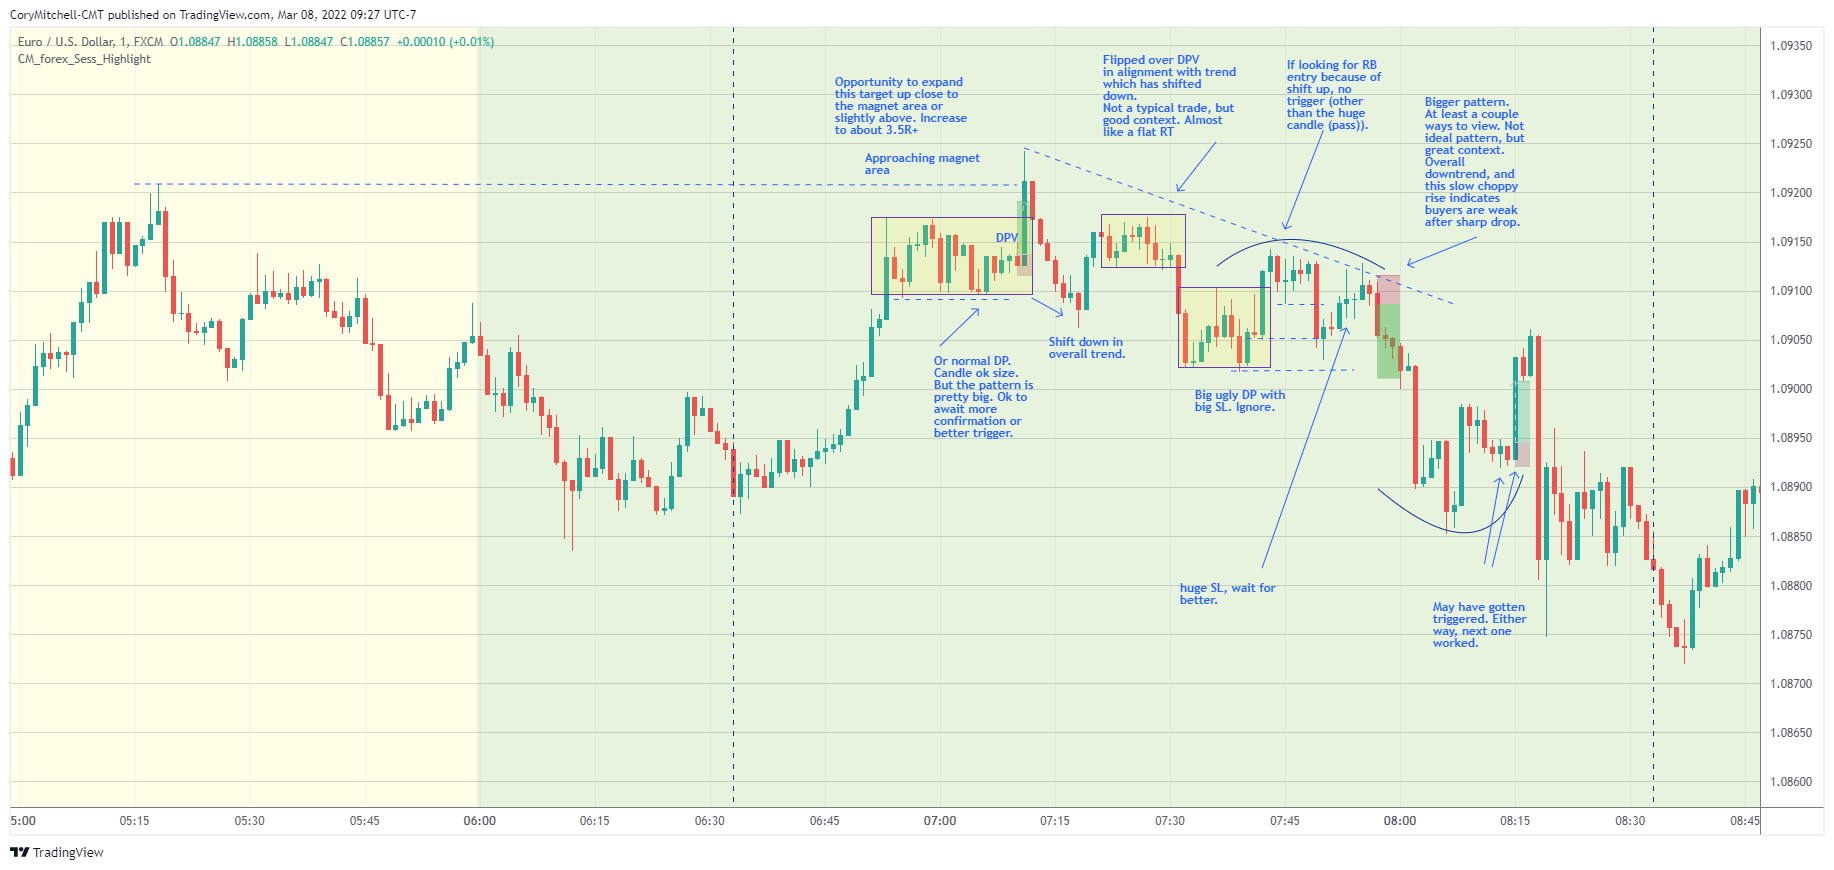 EURUSD day trading examples March 8